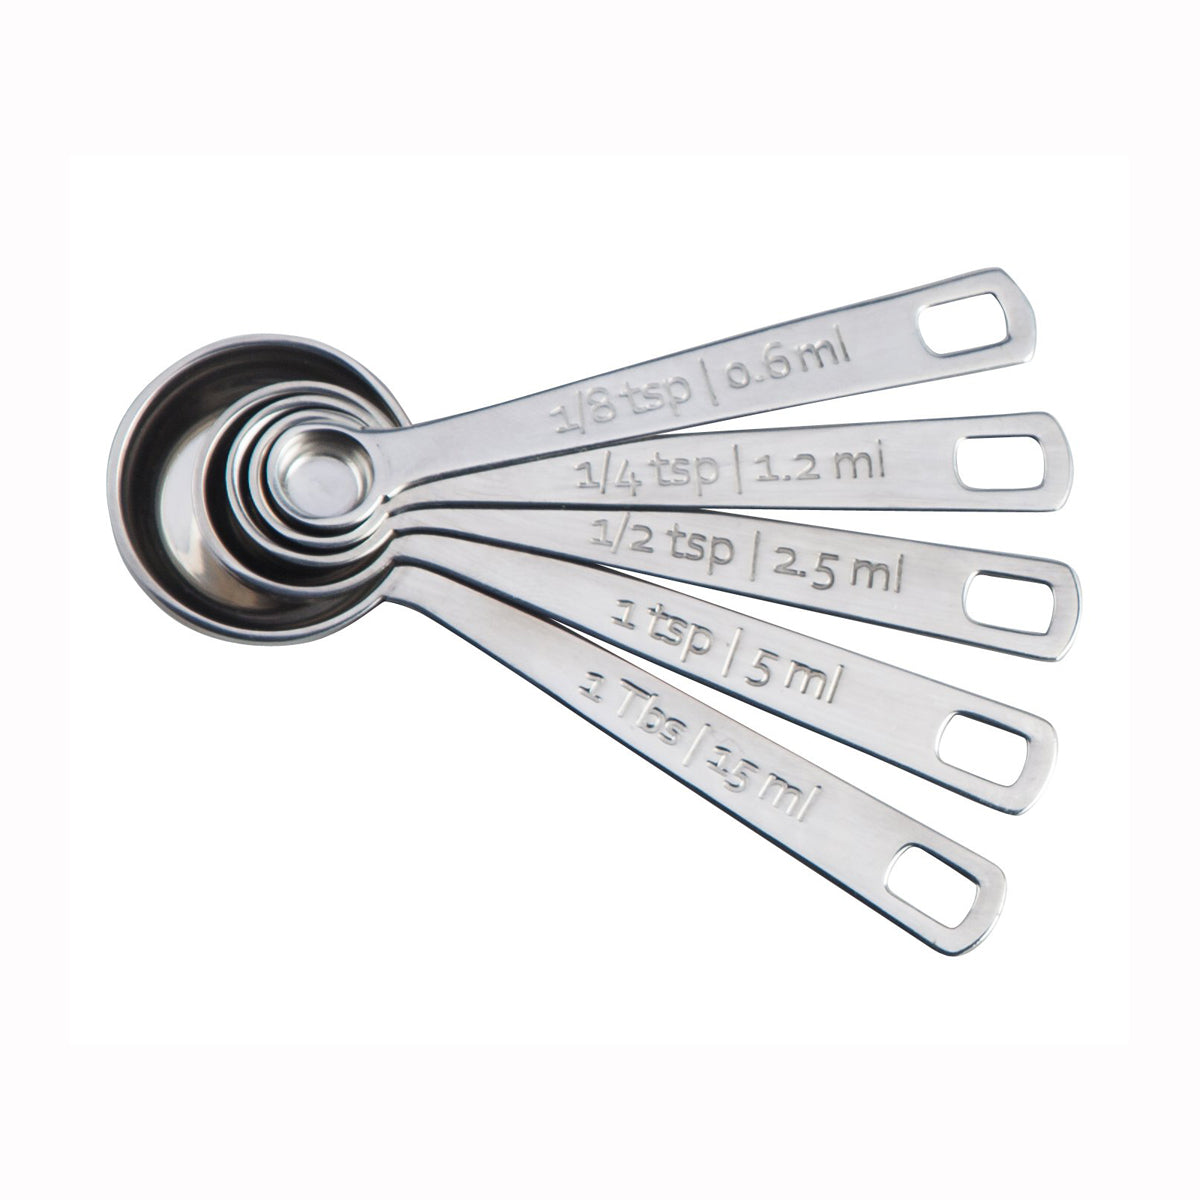 Stainless Steel Measuring Spoons - Set of 5, Le Creuset